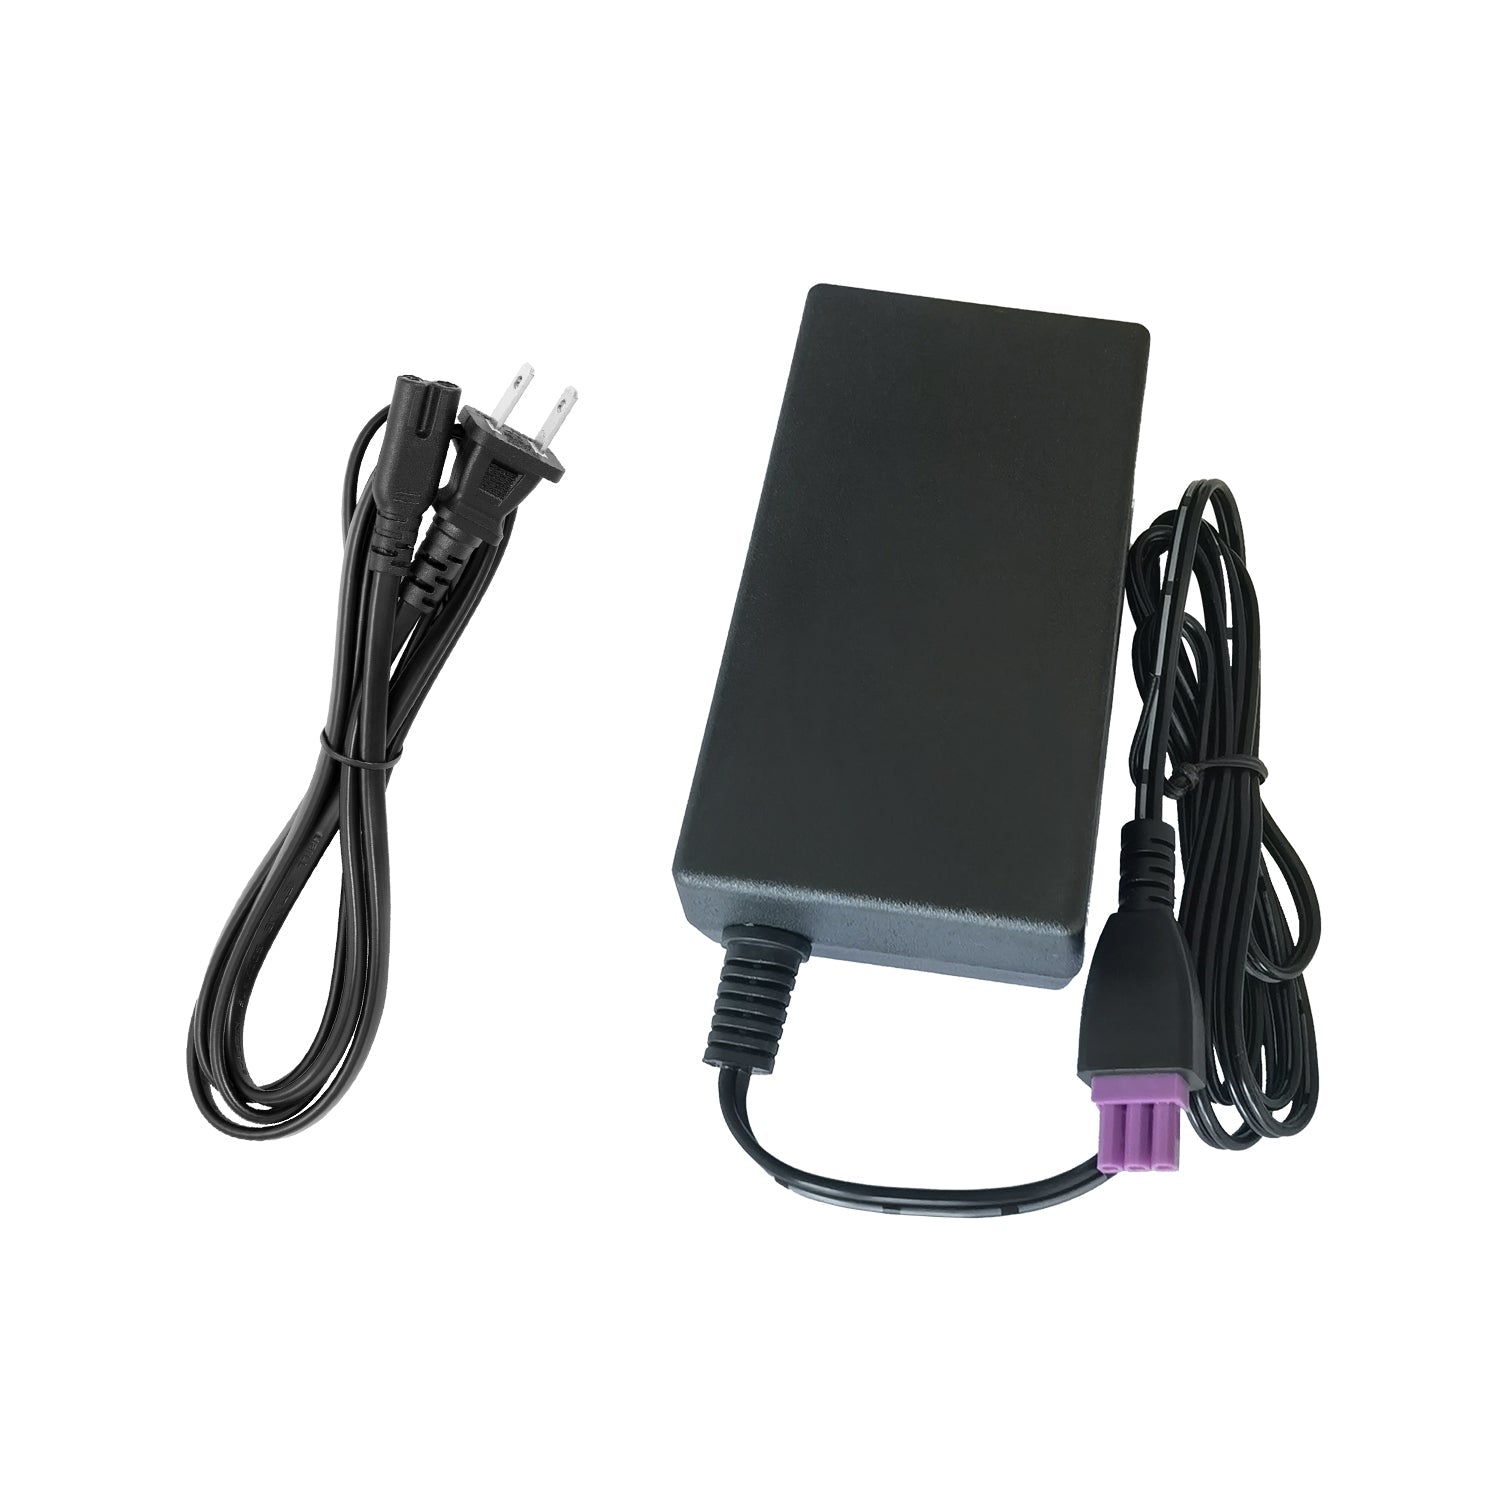 Power Adapter for HP Officejet 4500 All-in-One Printer.